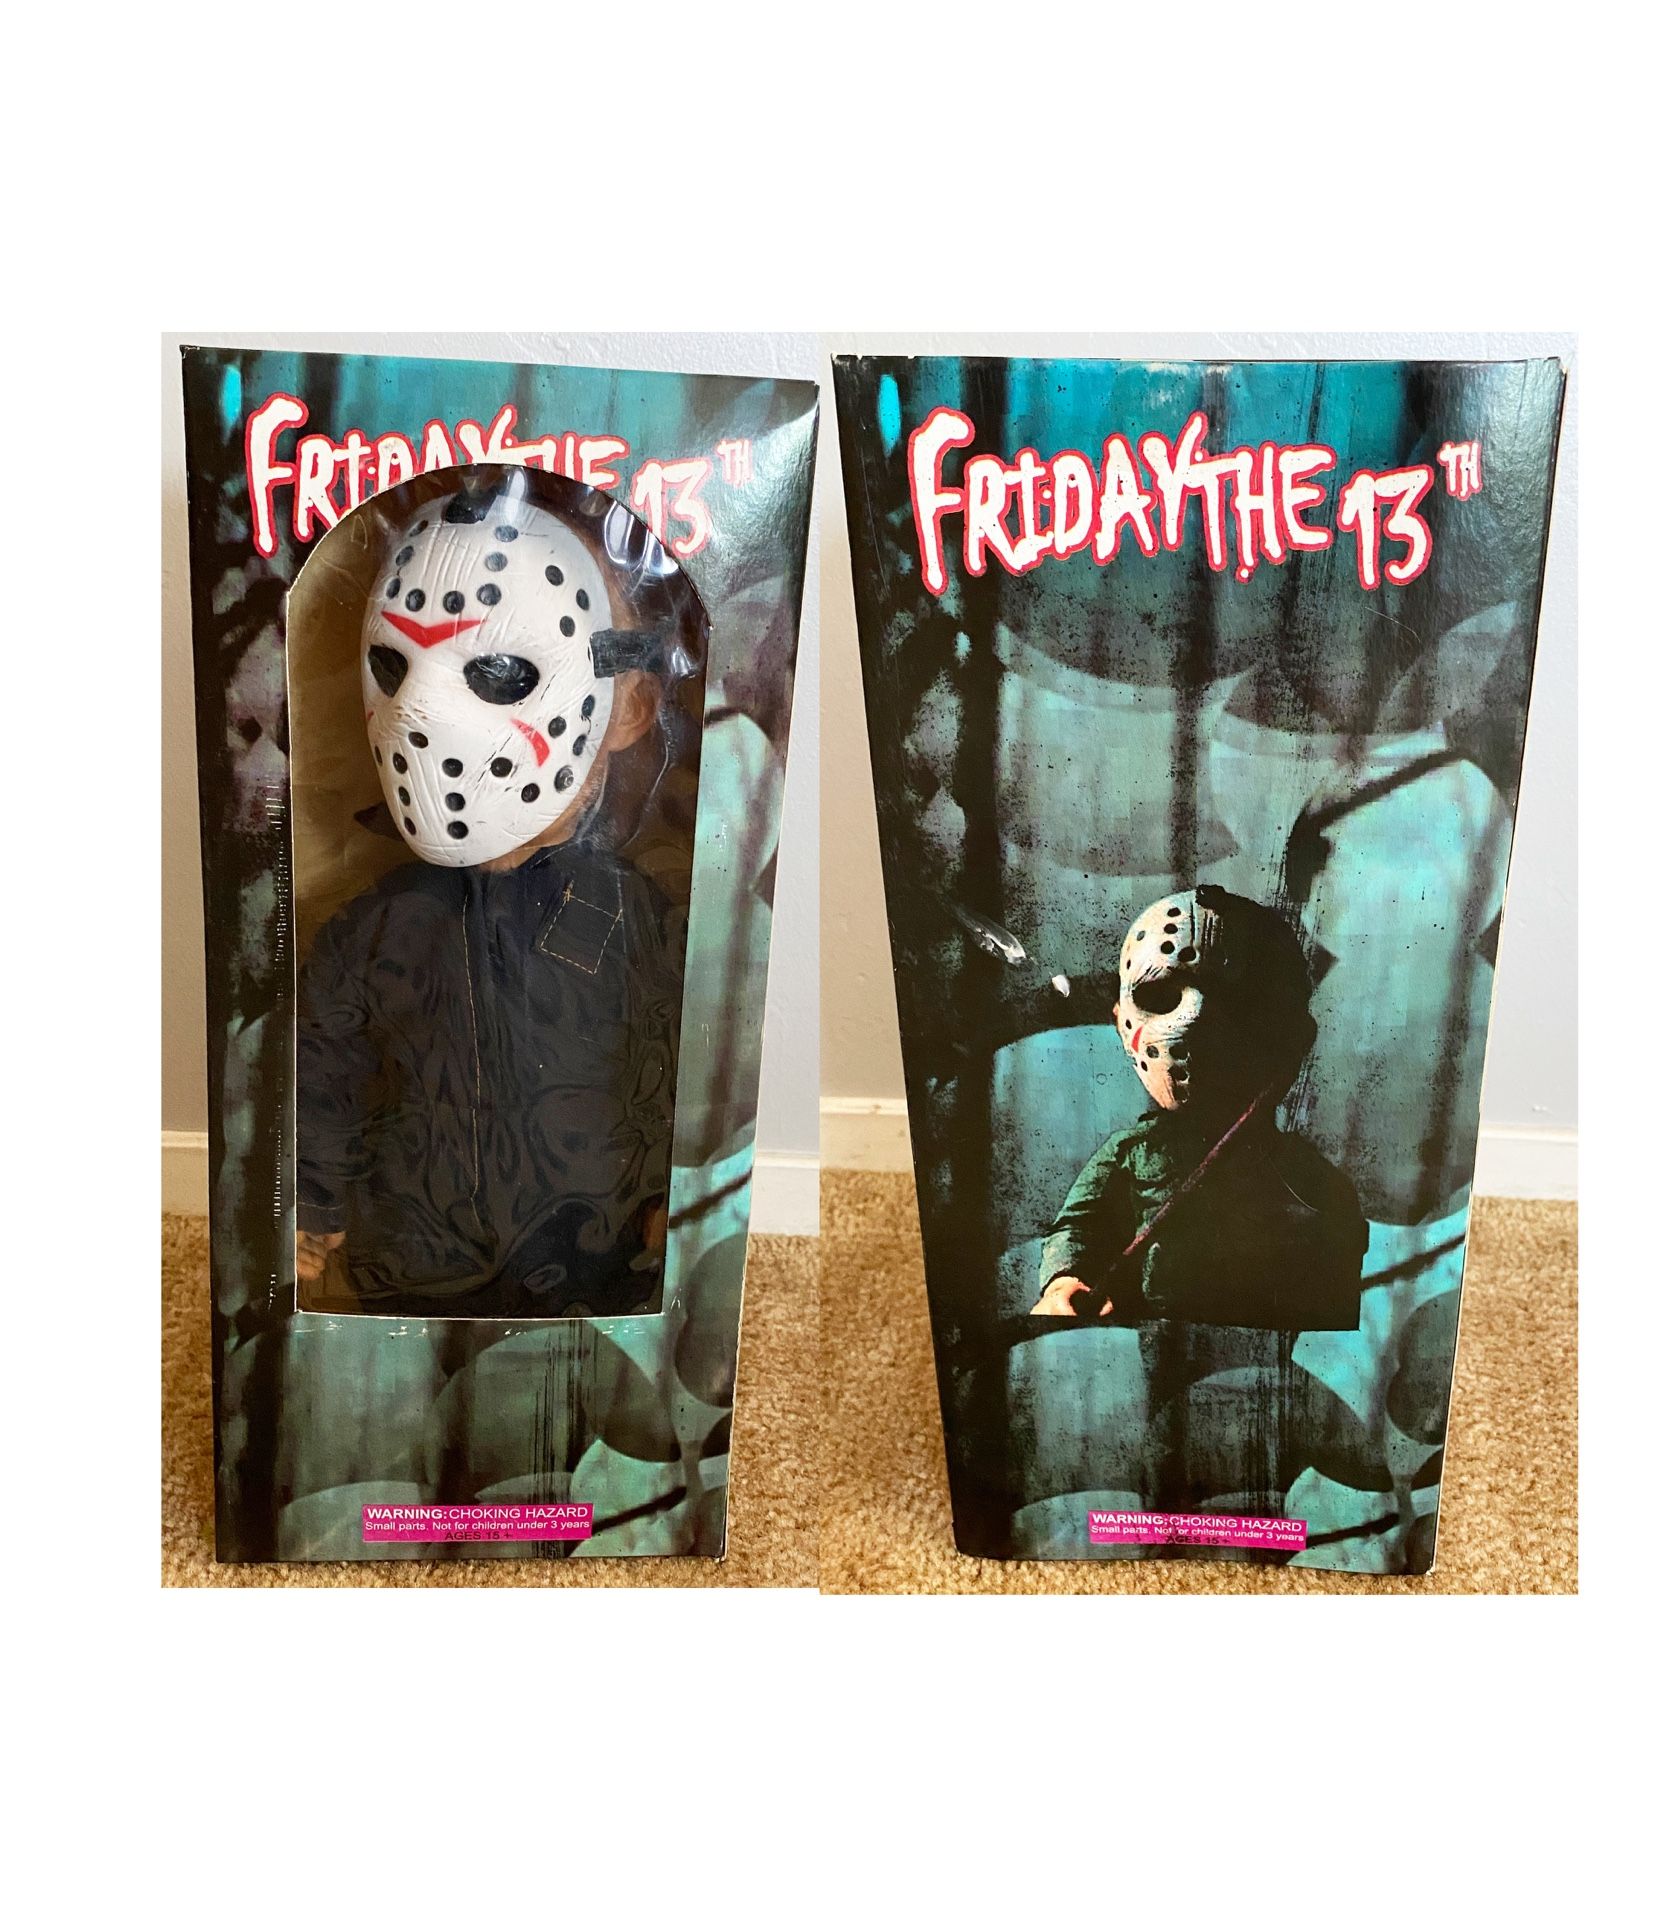 UNIQUE Friday The 13th Jason Voorhees Action Figure Doll For Sale!!!